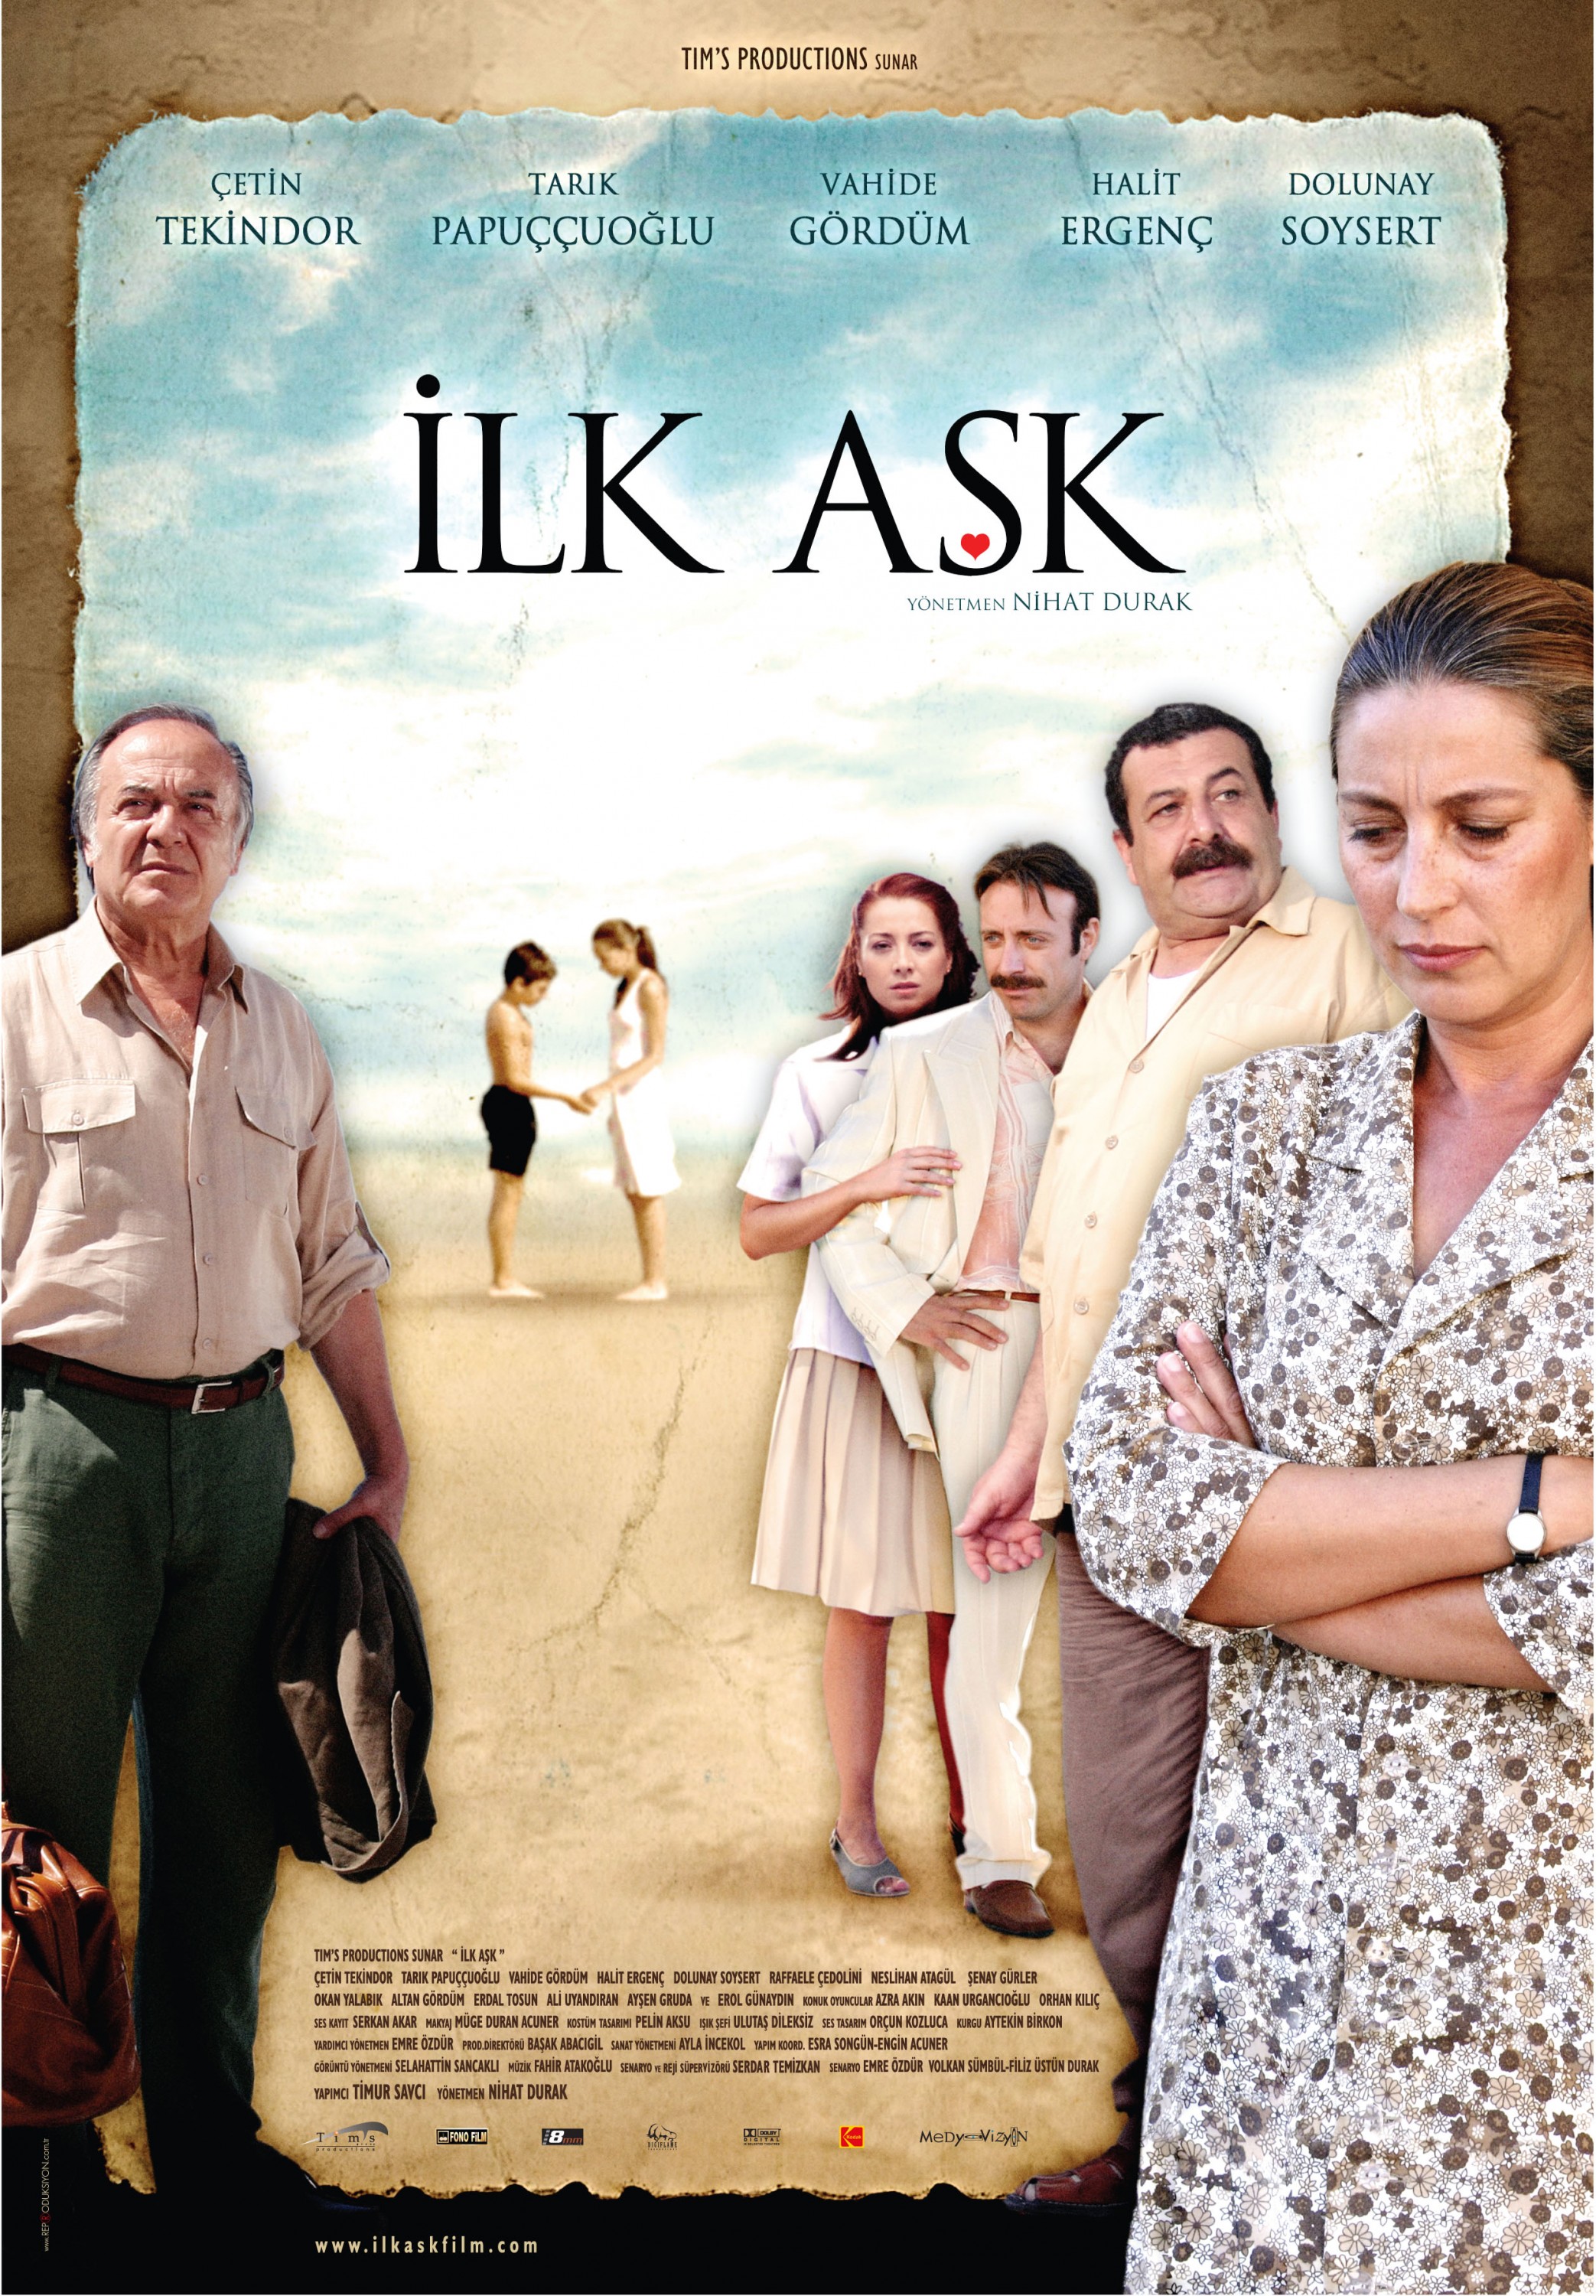 Mega Sized Movie Poster Image for Ilk ask 